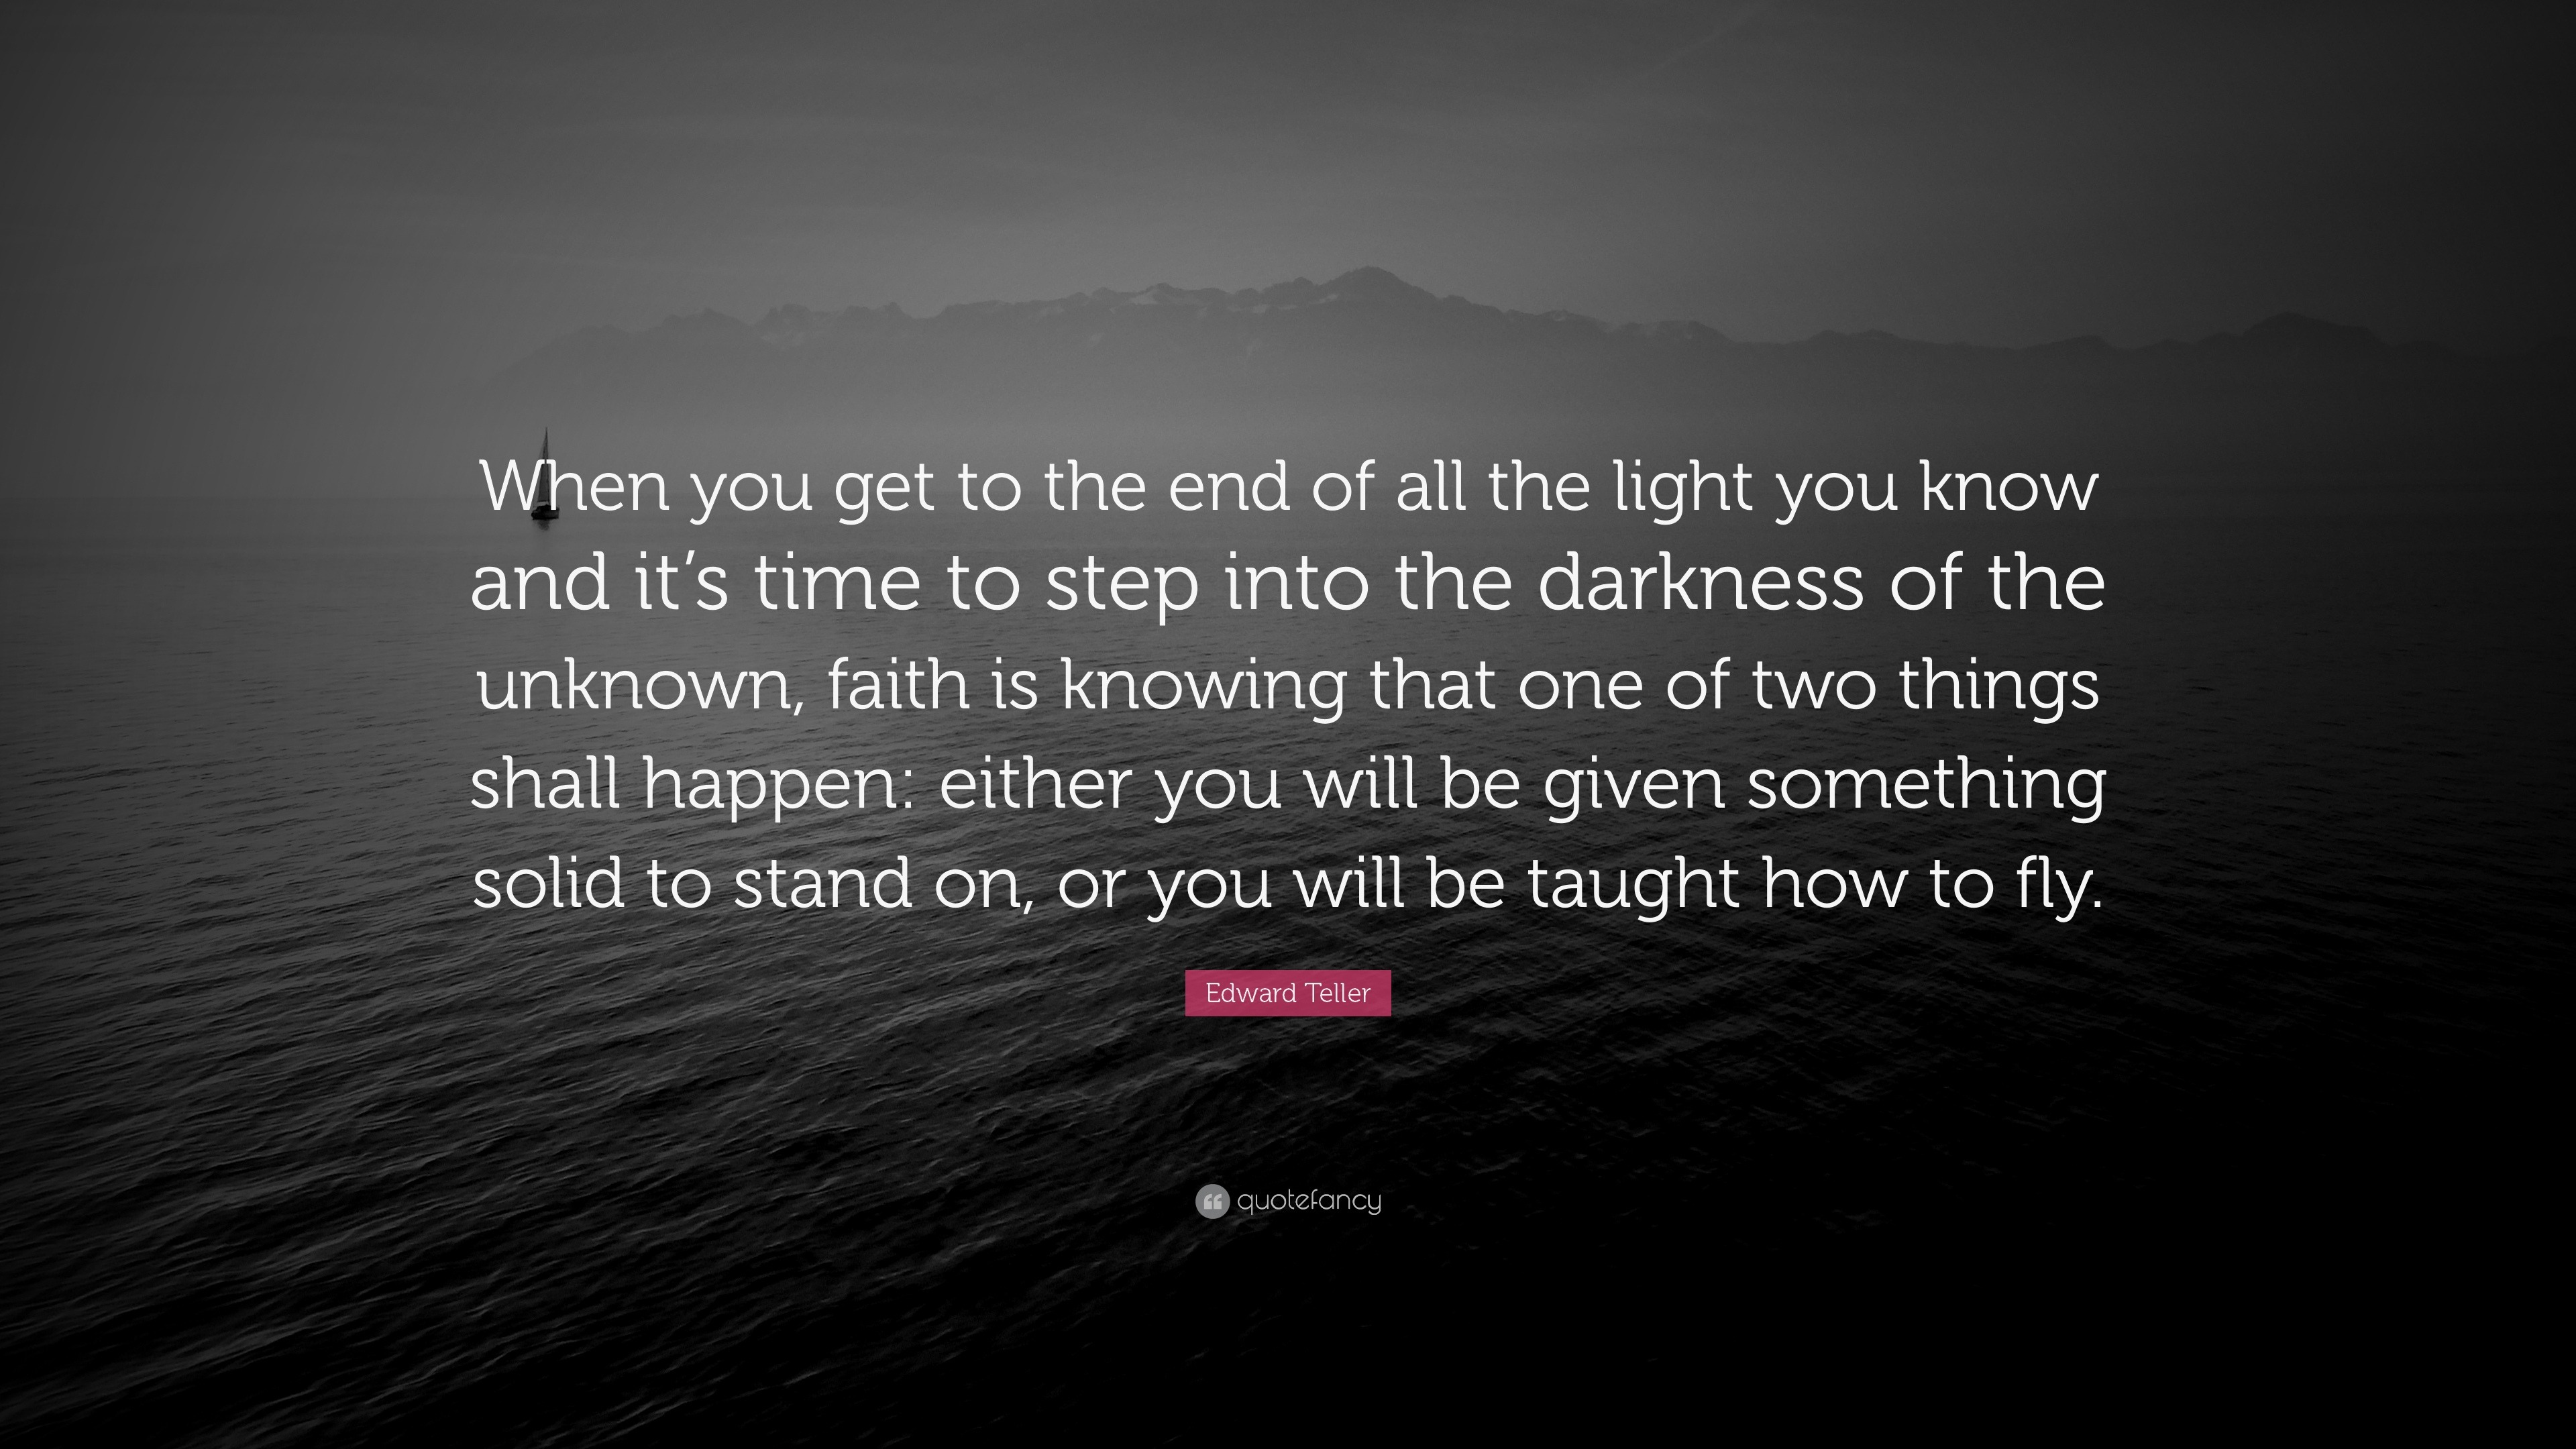 Edward Teller Quote “When you get to the end of all the light you know